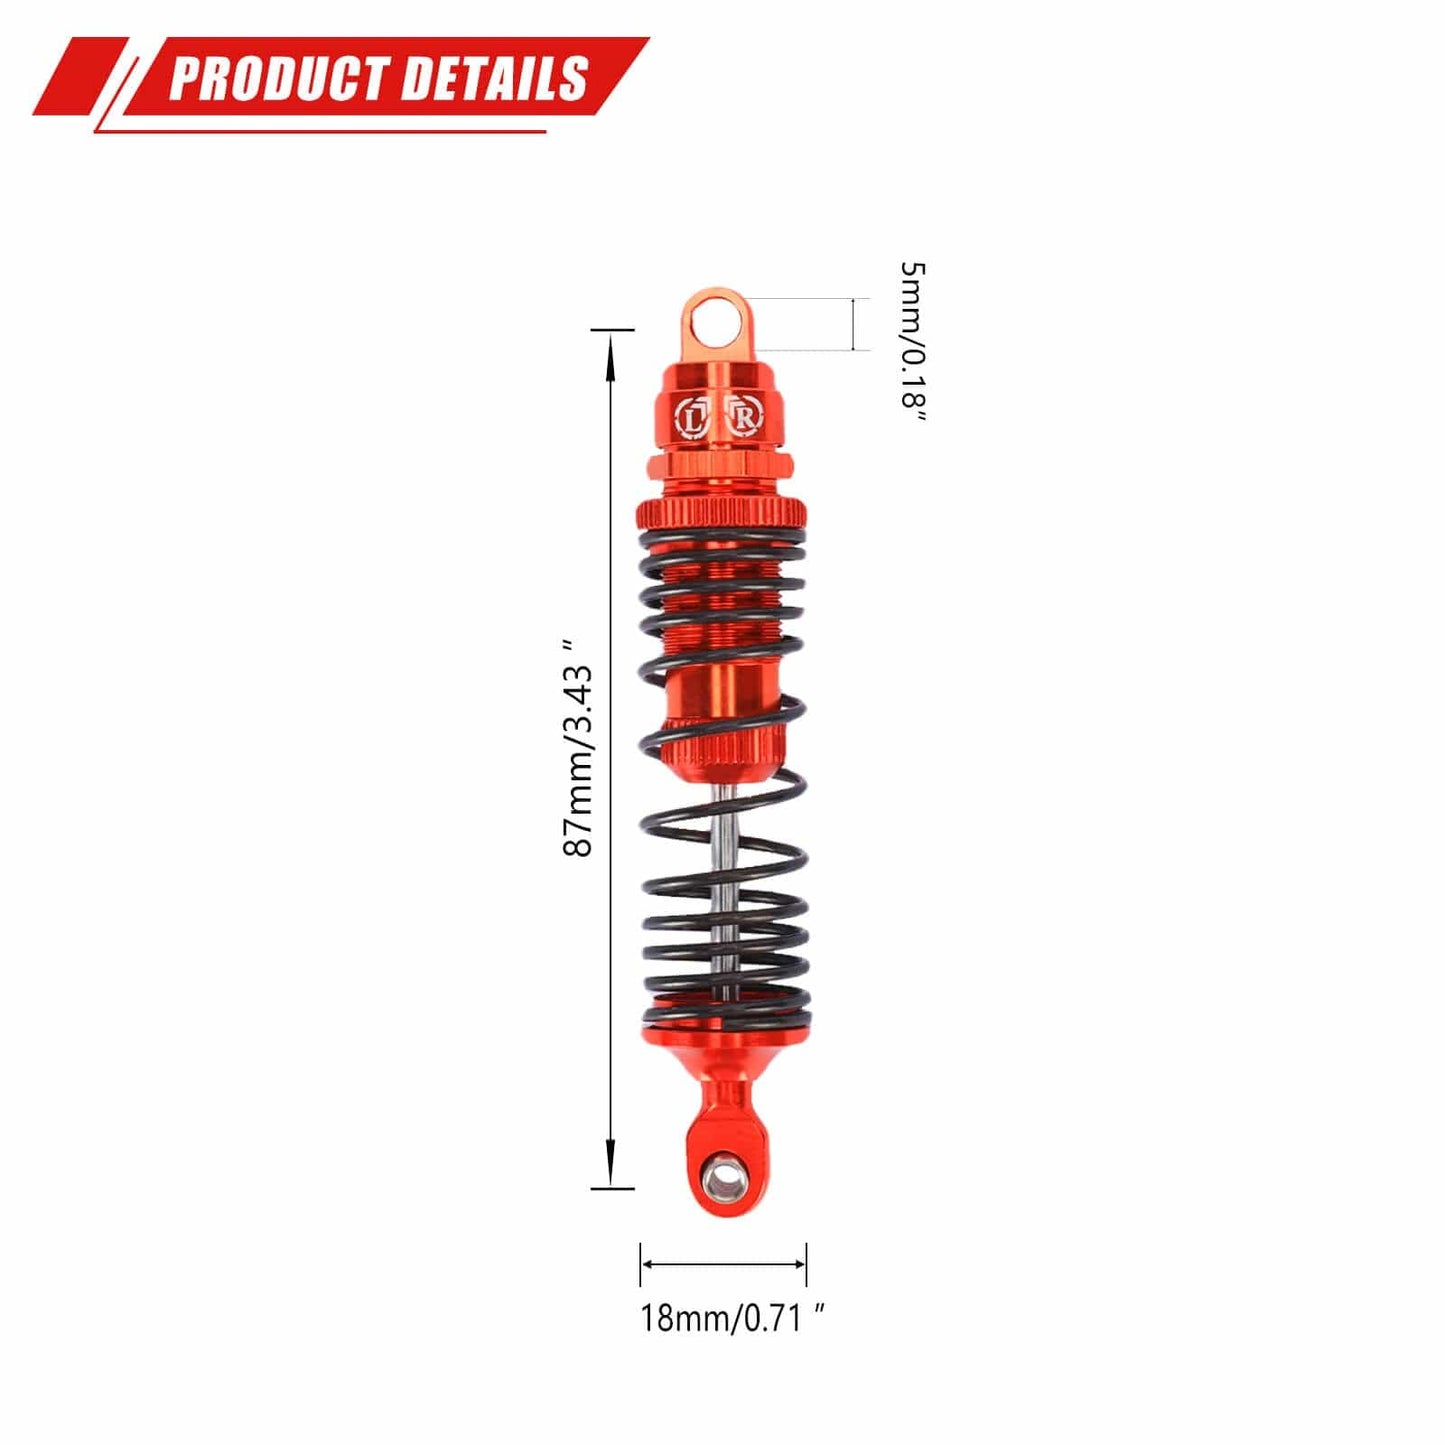 RCAWD TRAXXAS SLASH 2WD RCAWD TRXXAS Aluminum Big Bore Shocks Absorber oil-filled type for 1/10 Slash 2wd Series